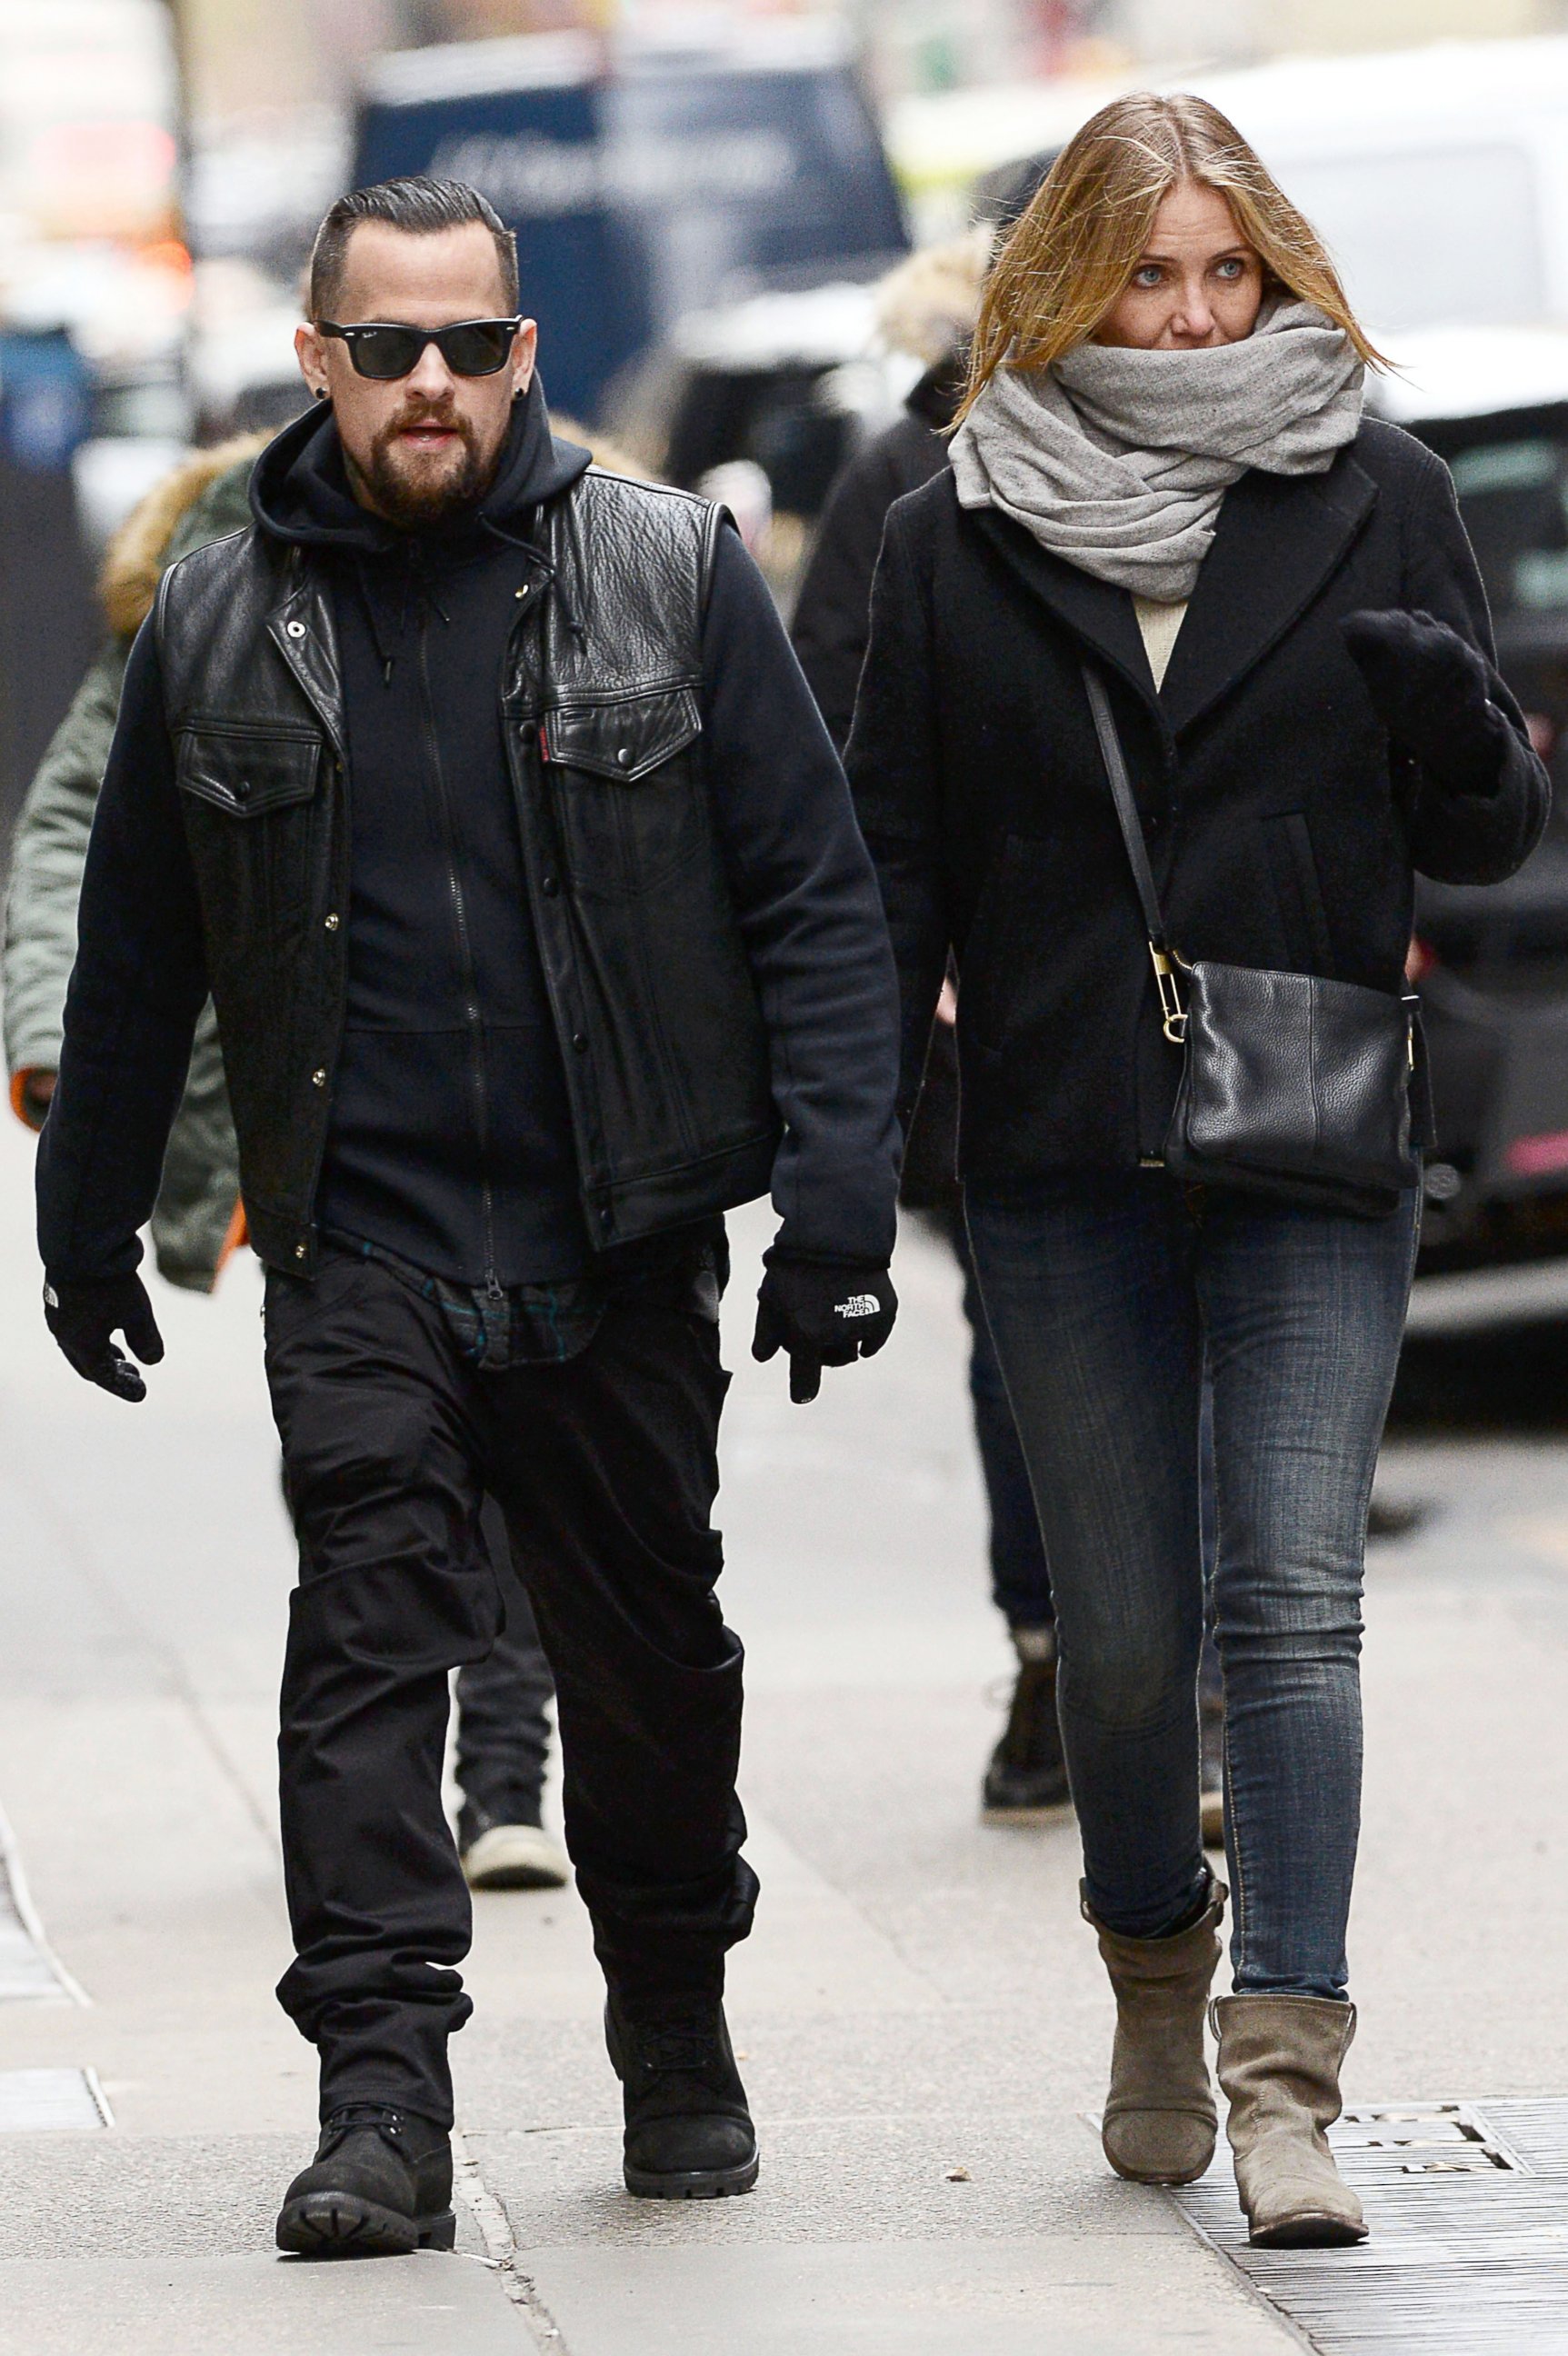 PHOTO: Benji Madden and Cameron Diaz are seen out for a walk in this Nov. 29, 2014 file photo in New York.